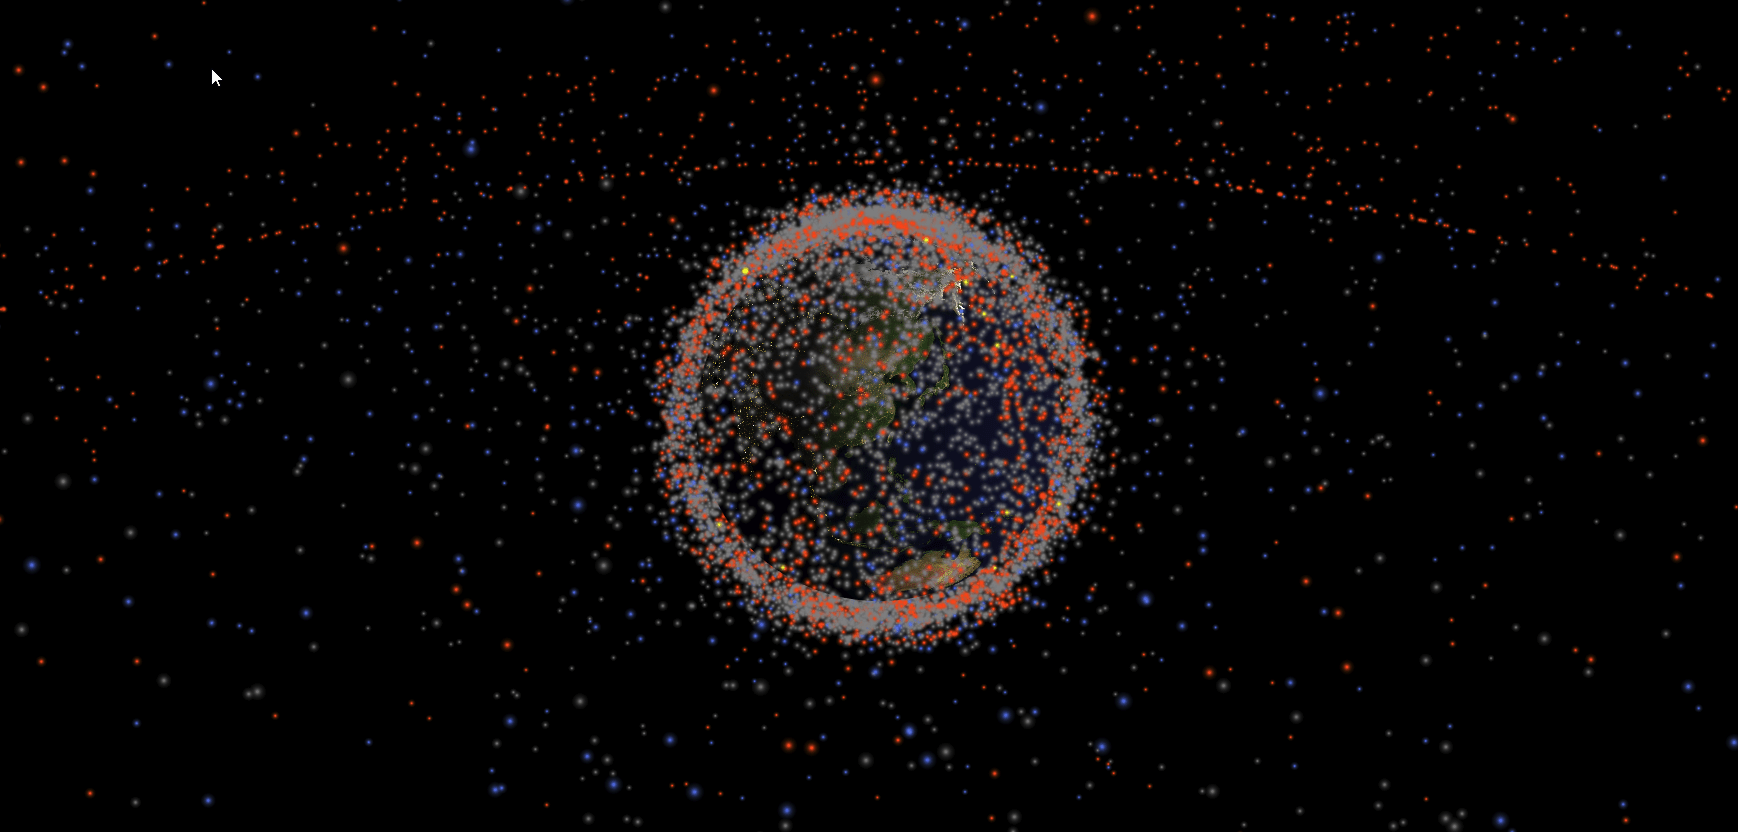 Stuff in Space. This is everything that's orbiting the Earth right now. Credit: James Yoder